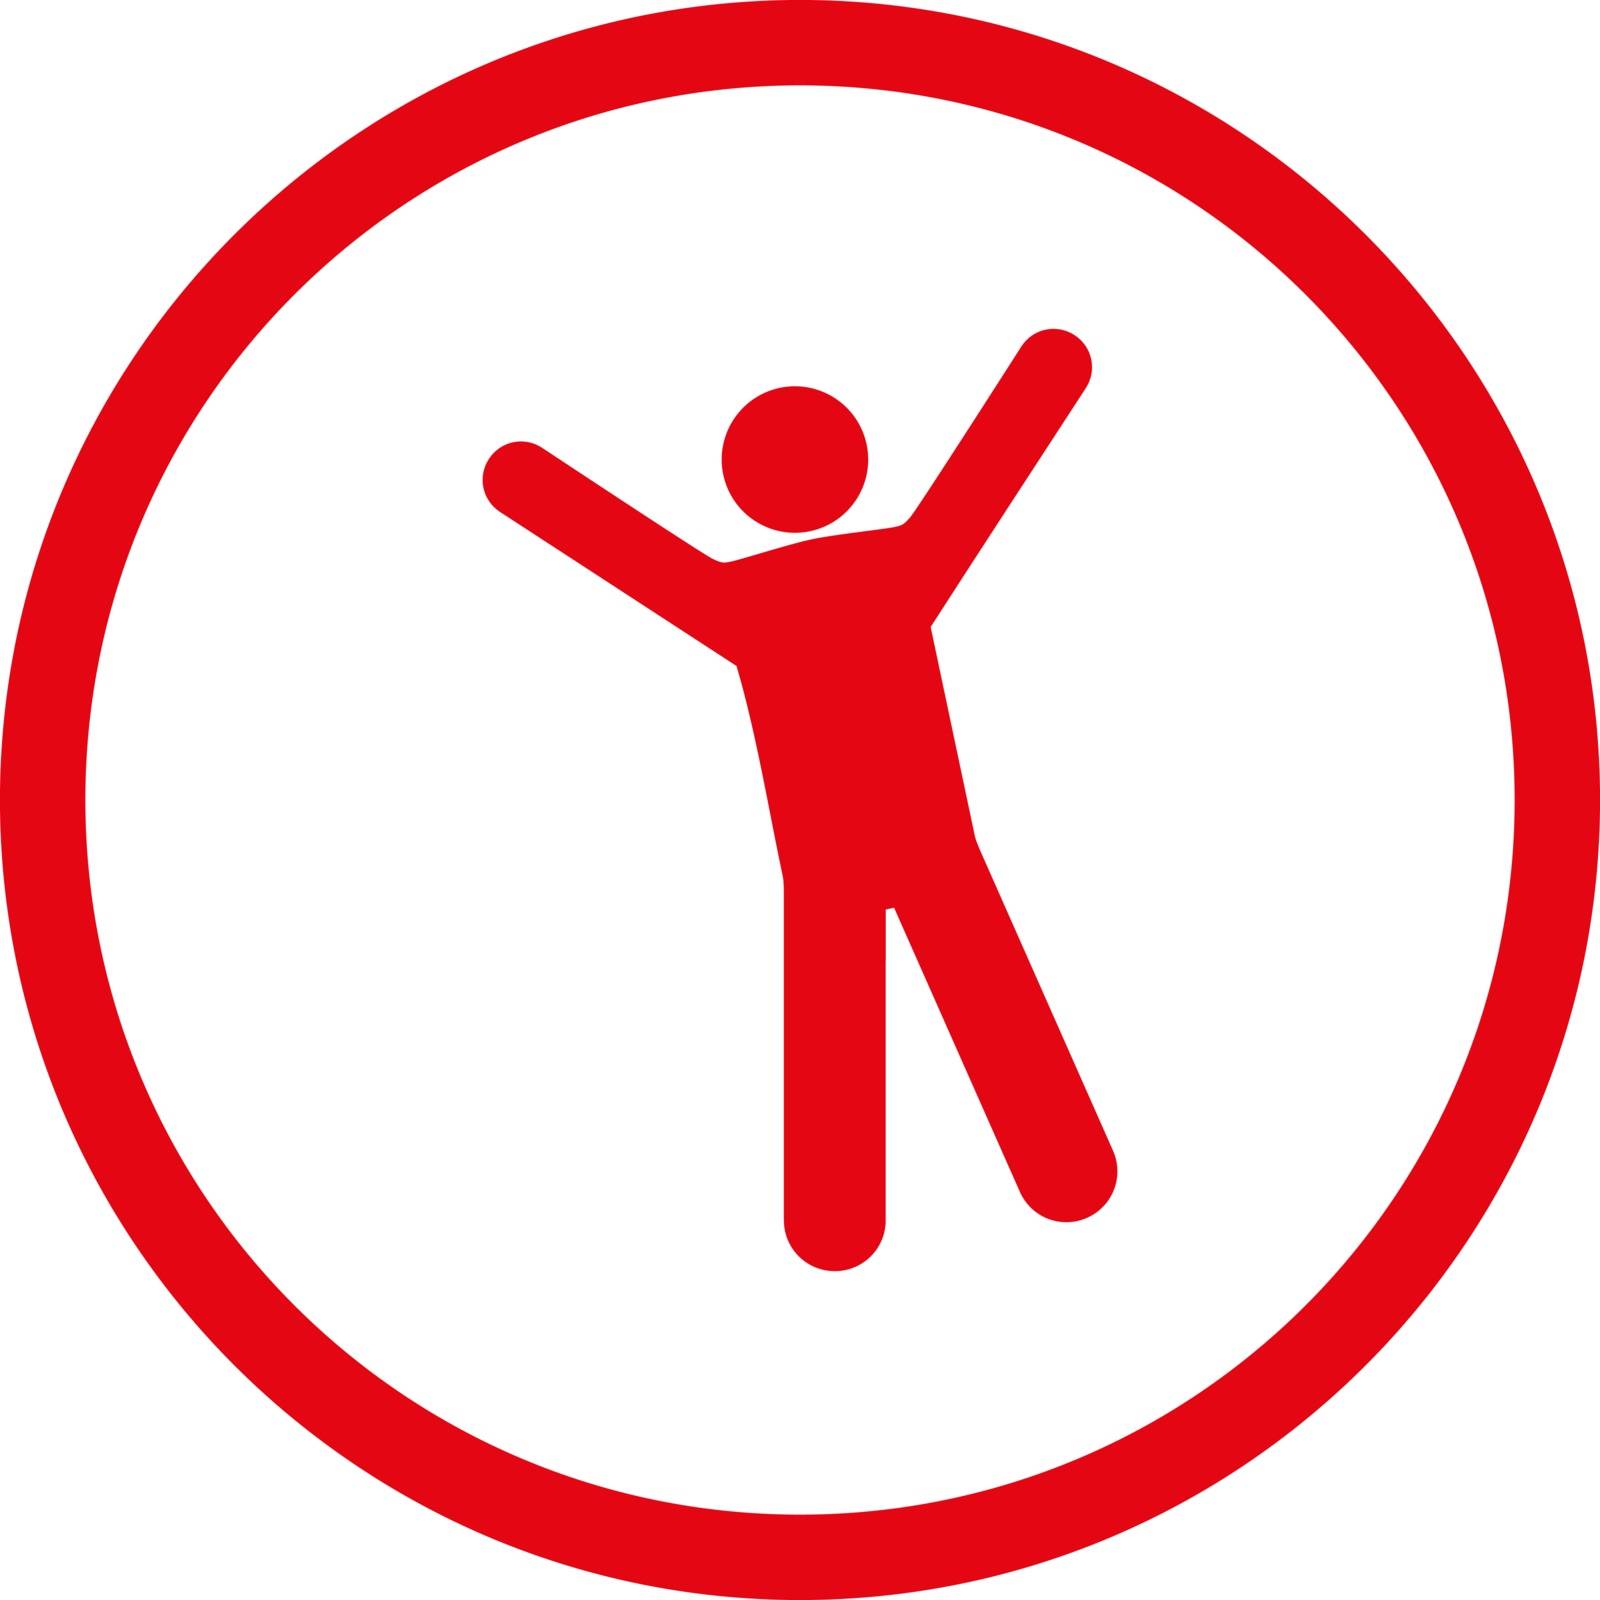 Joy vector icon. This rounded flat symbol is drawn with red color on a white background.